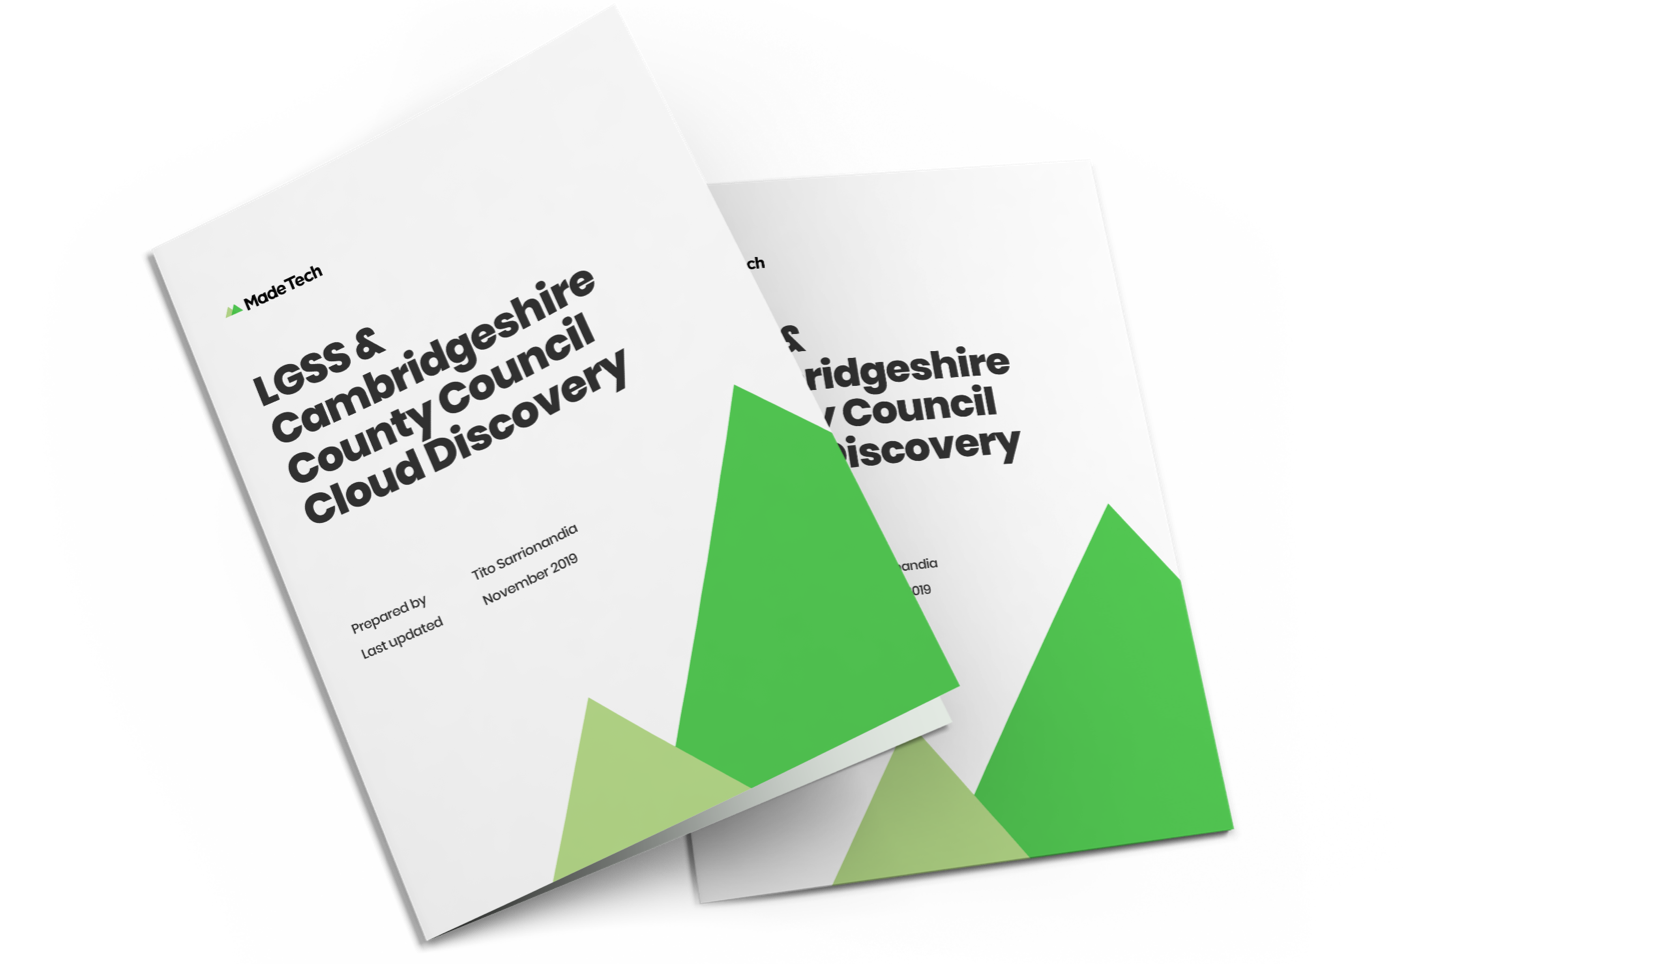 LGSS and cambridgeshire county council cloud discovery booklets